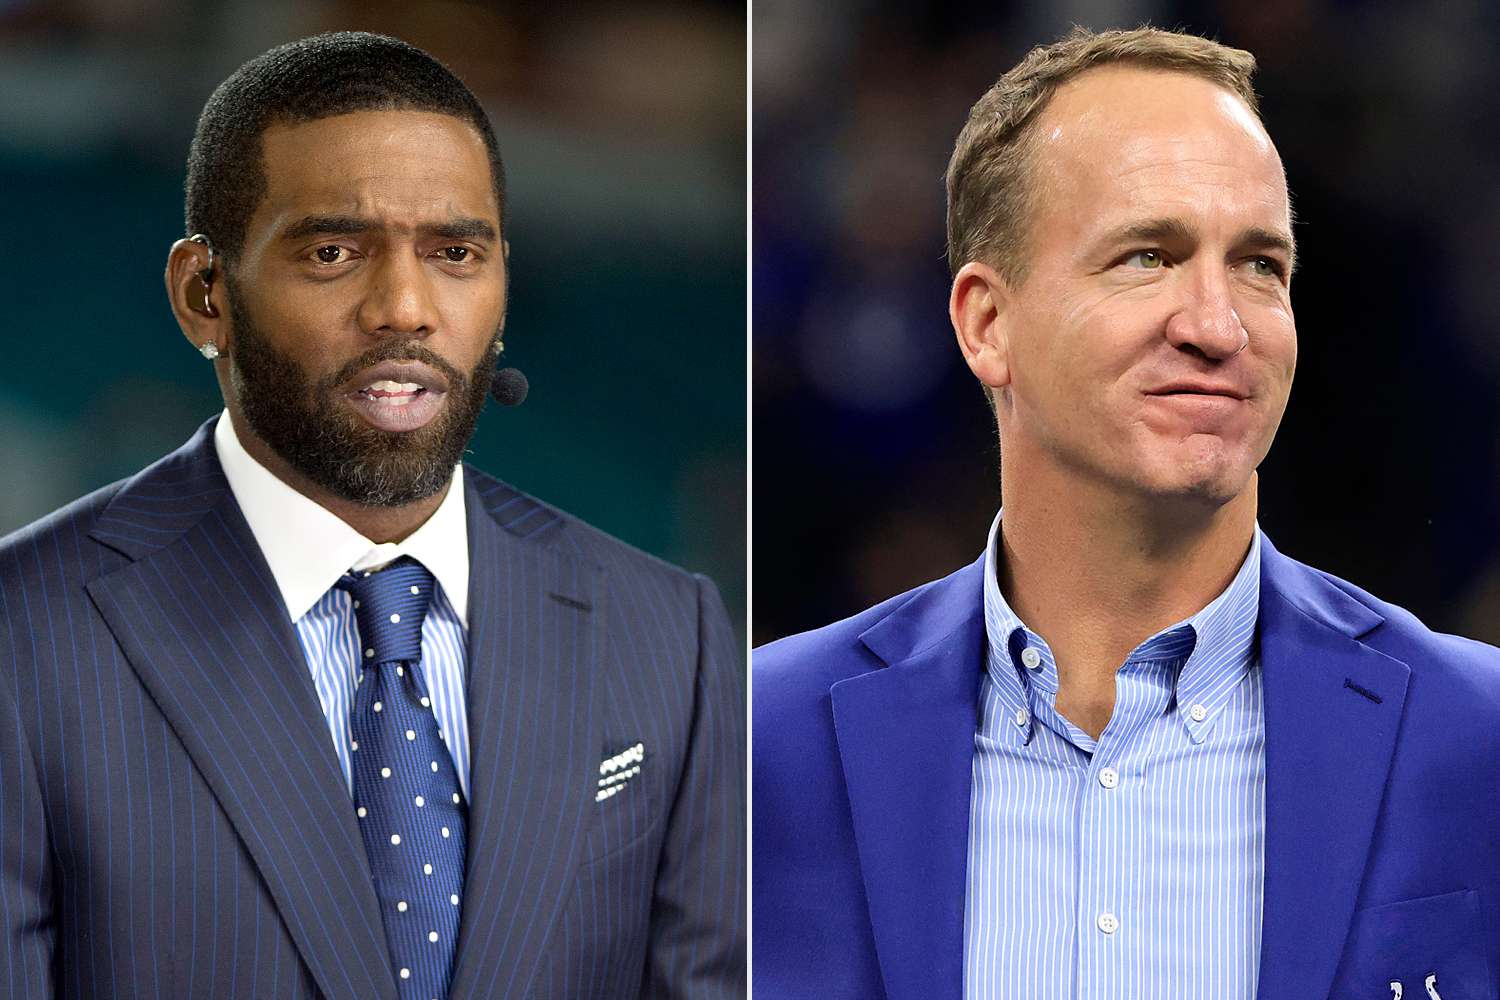 Randy Moss Takes Over for Peyton Manning to Introduce Netflix's New Show 'Receiver’: ‘It’s in Good Hands’